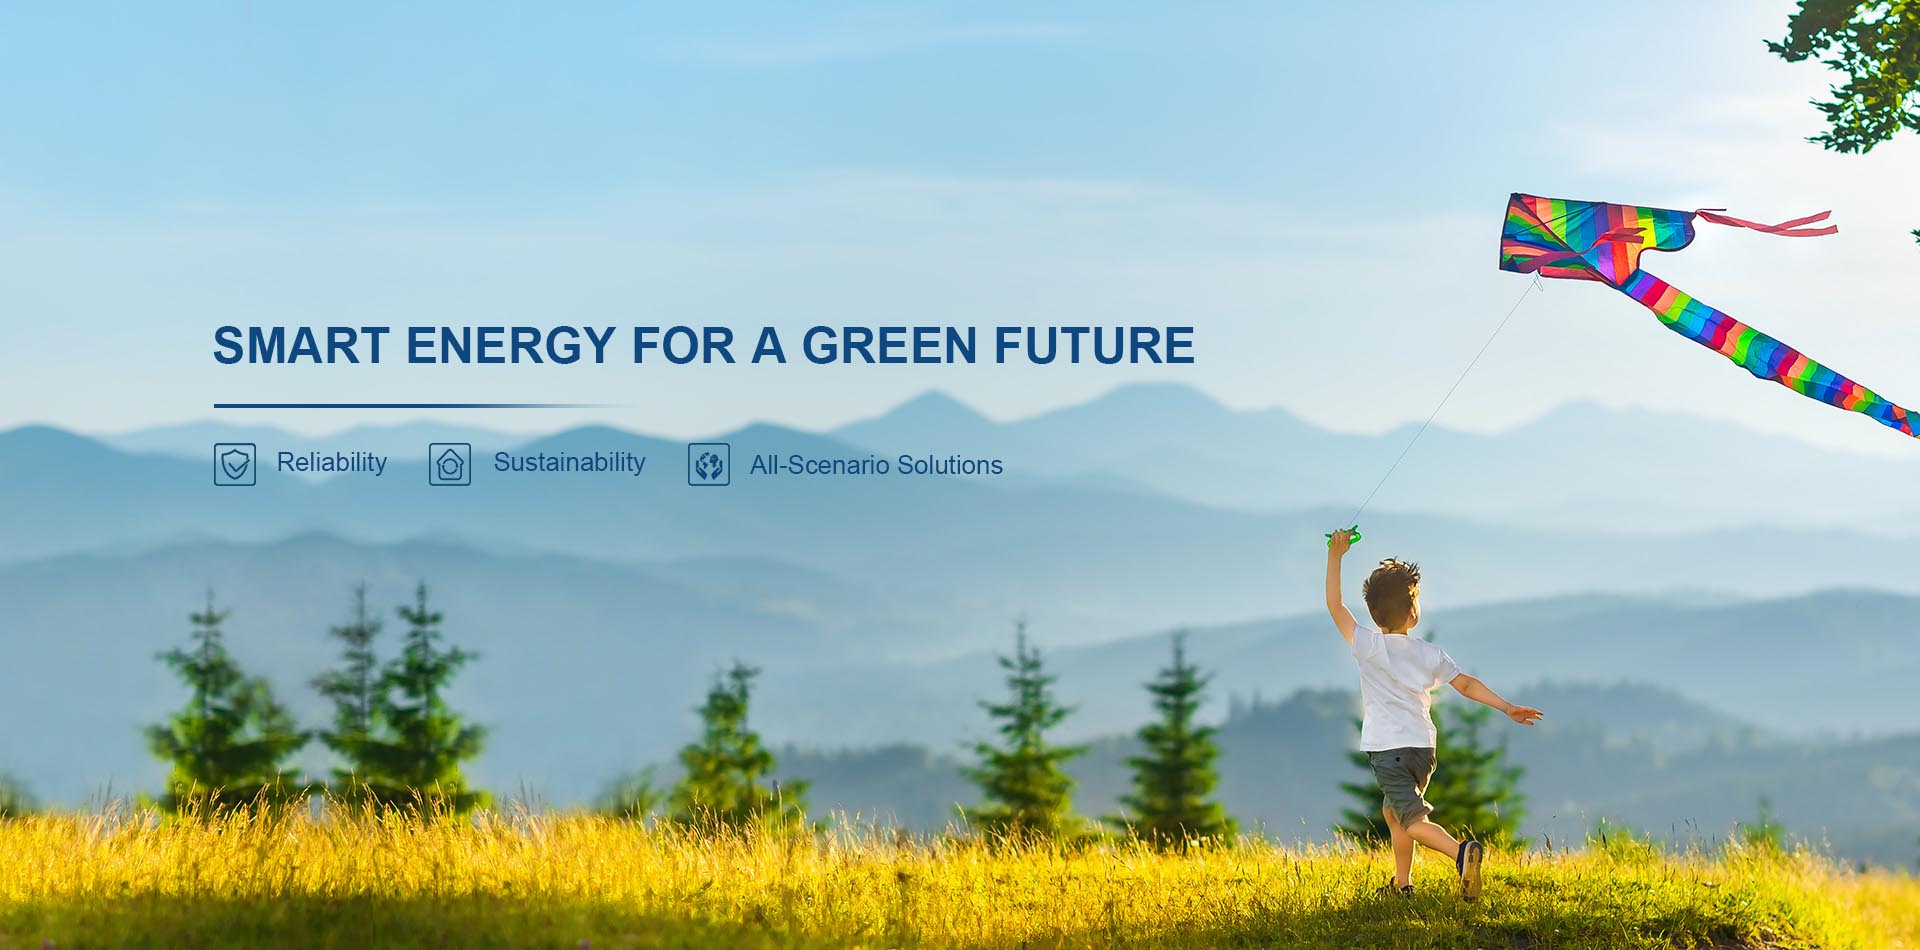 Smart energy for a green future.jpg